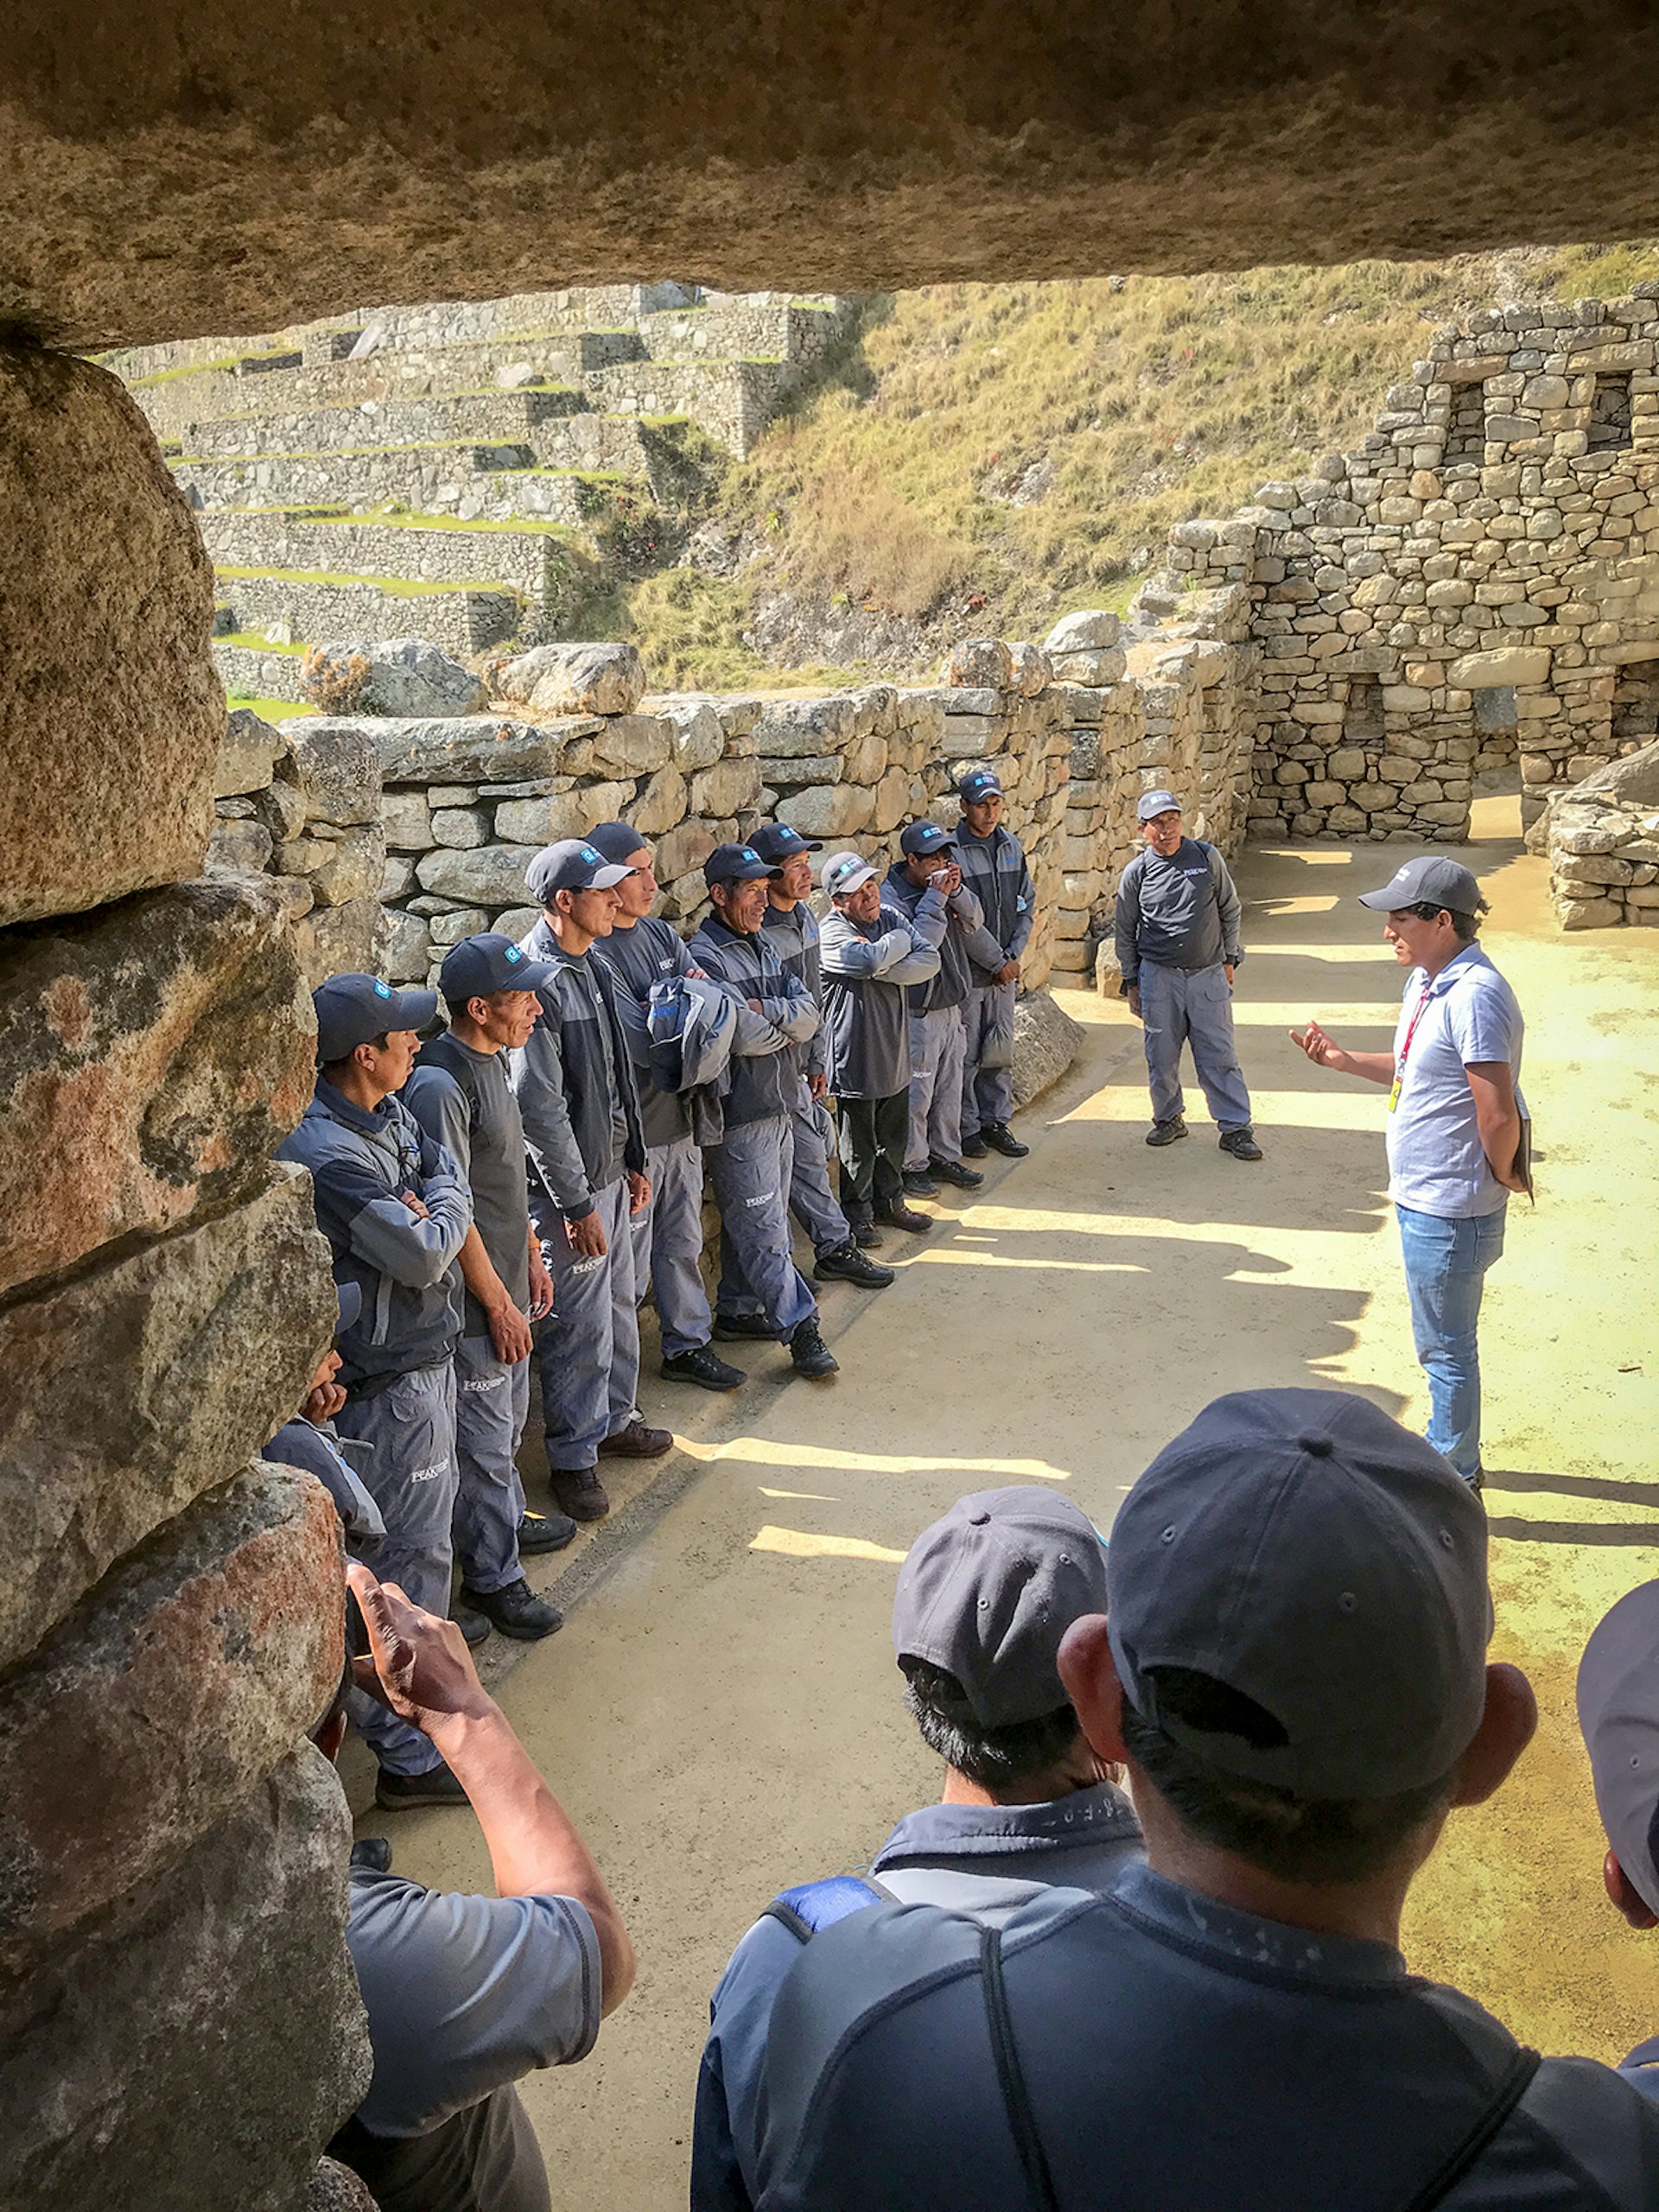 Men stand along a stone wall at Machu Picchu listening to a guide speak about the site 